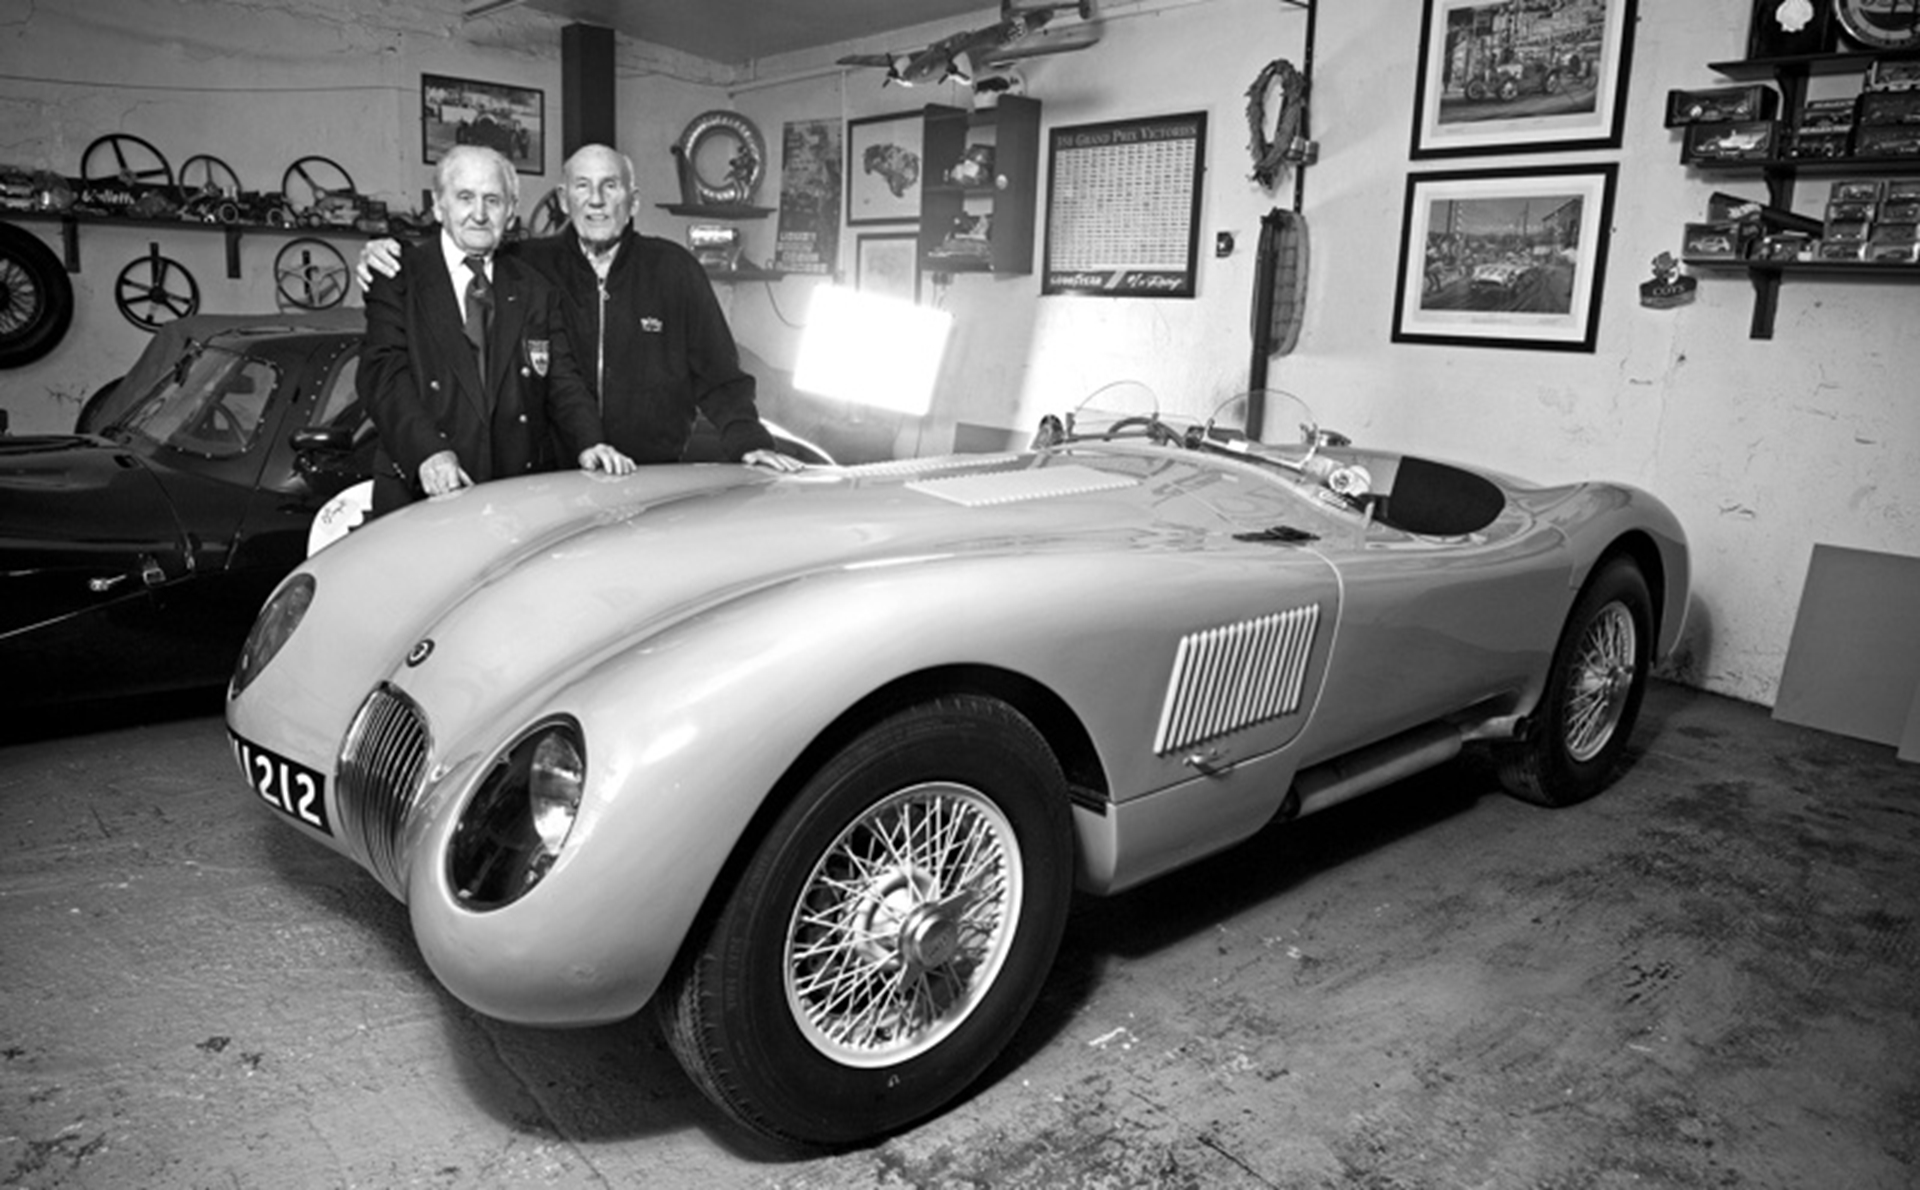 Jaguar Heritage Racing will make its debut in the 2012 Mille Miglia